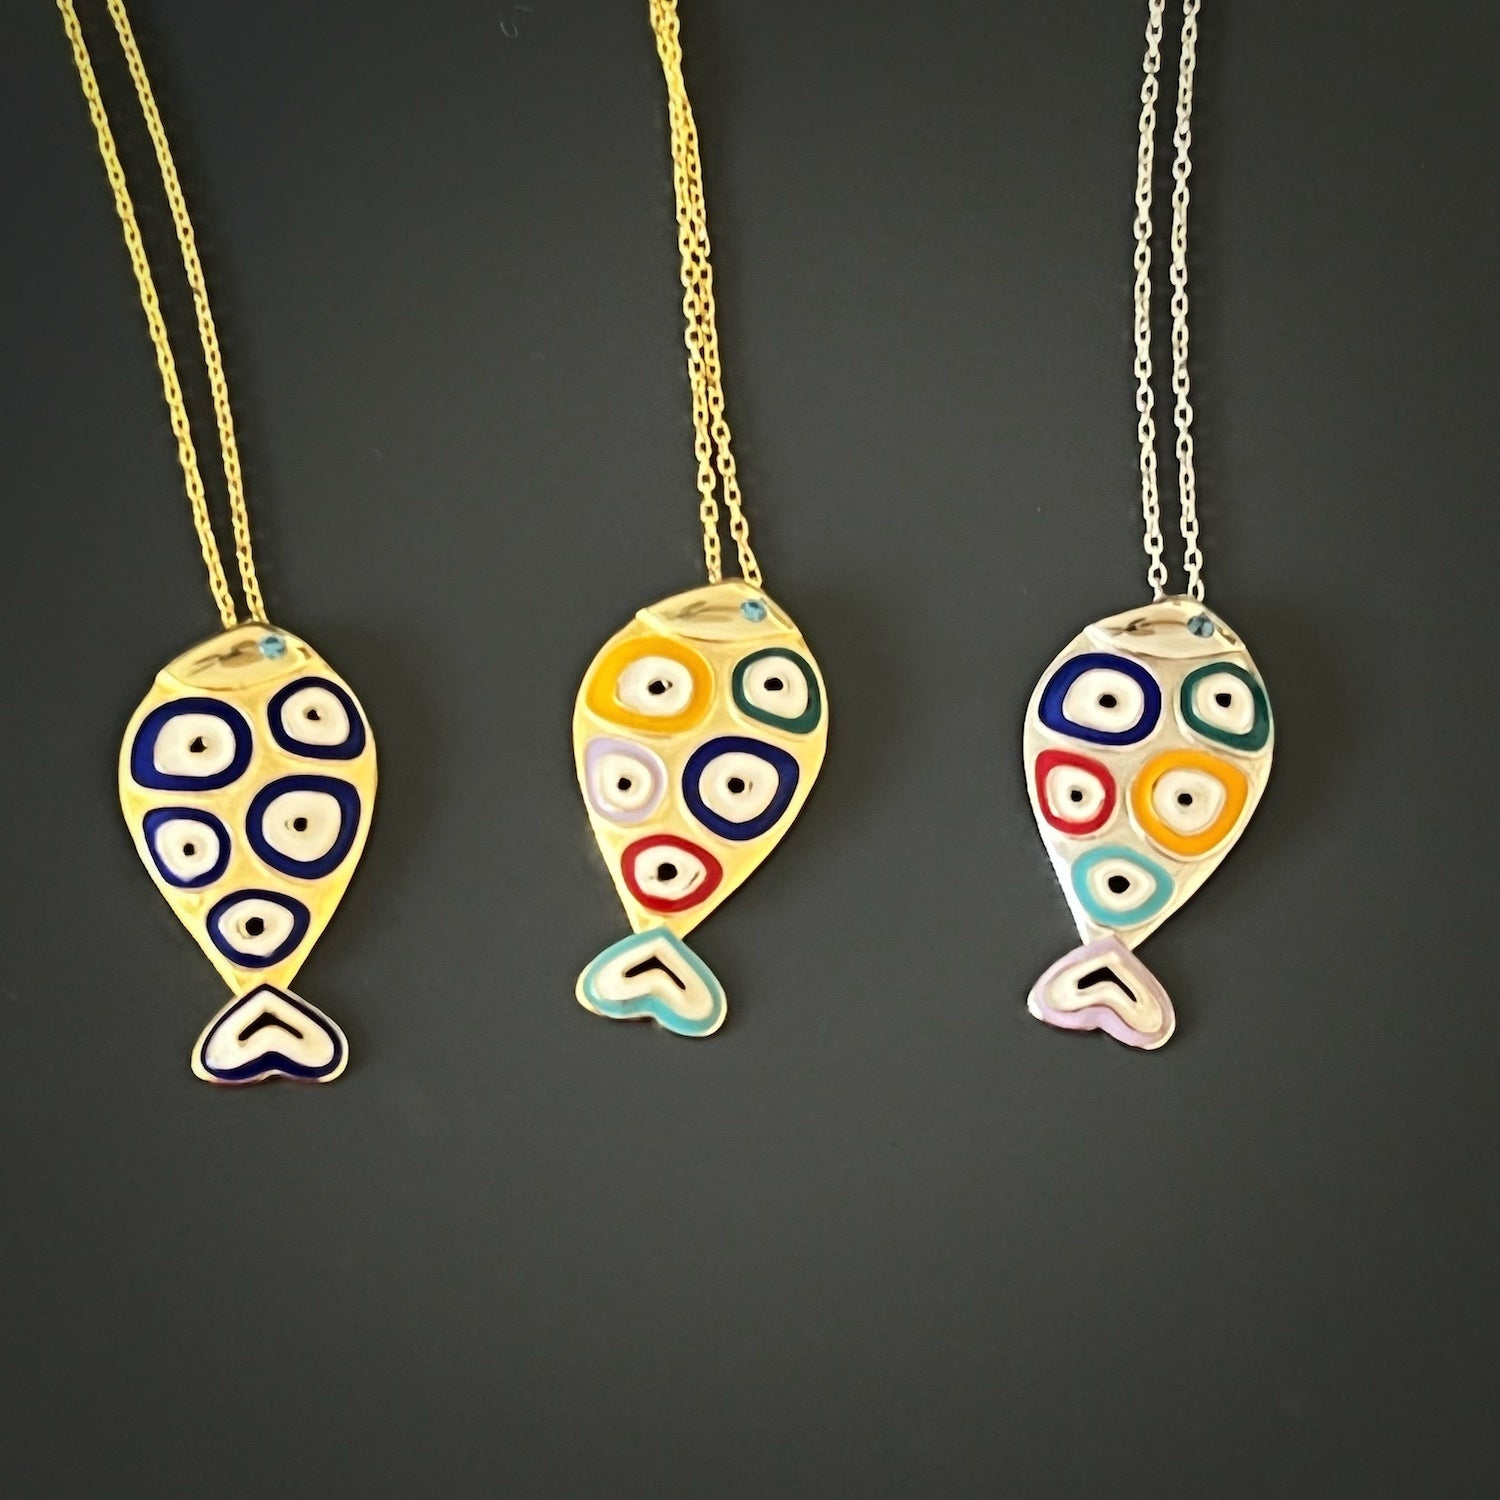 Handmade Gold and Enamel Fish Pendant Necklace - Exquisite necklace made with care from 925 Sterling silver on 18K gold plated chain, showcasing a fish pendant with intricate evil eye designs and vibrant enamel.